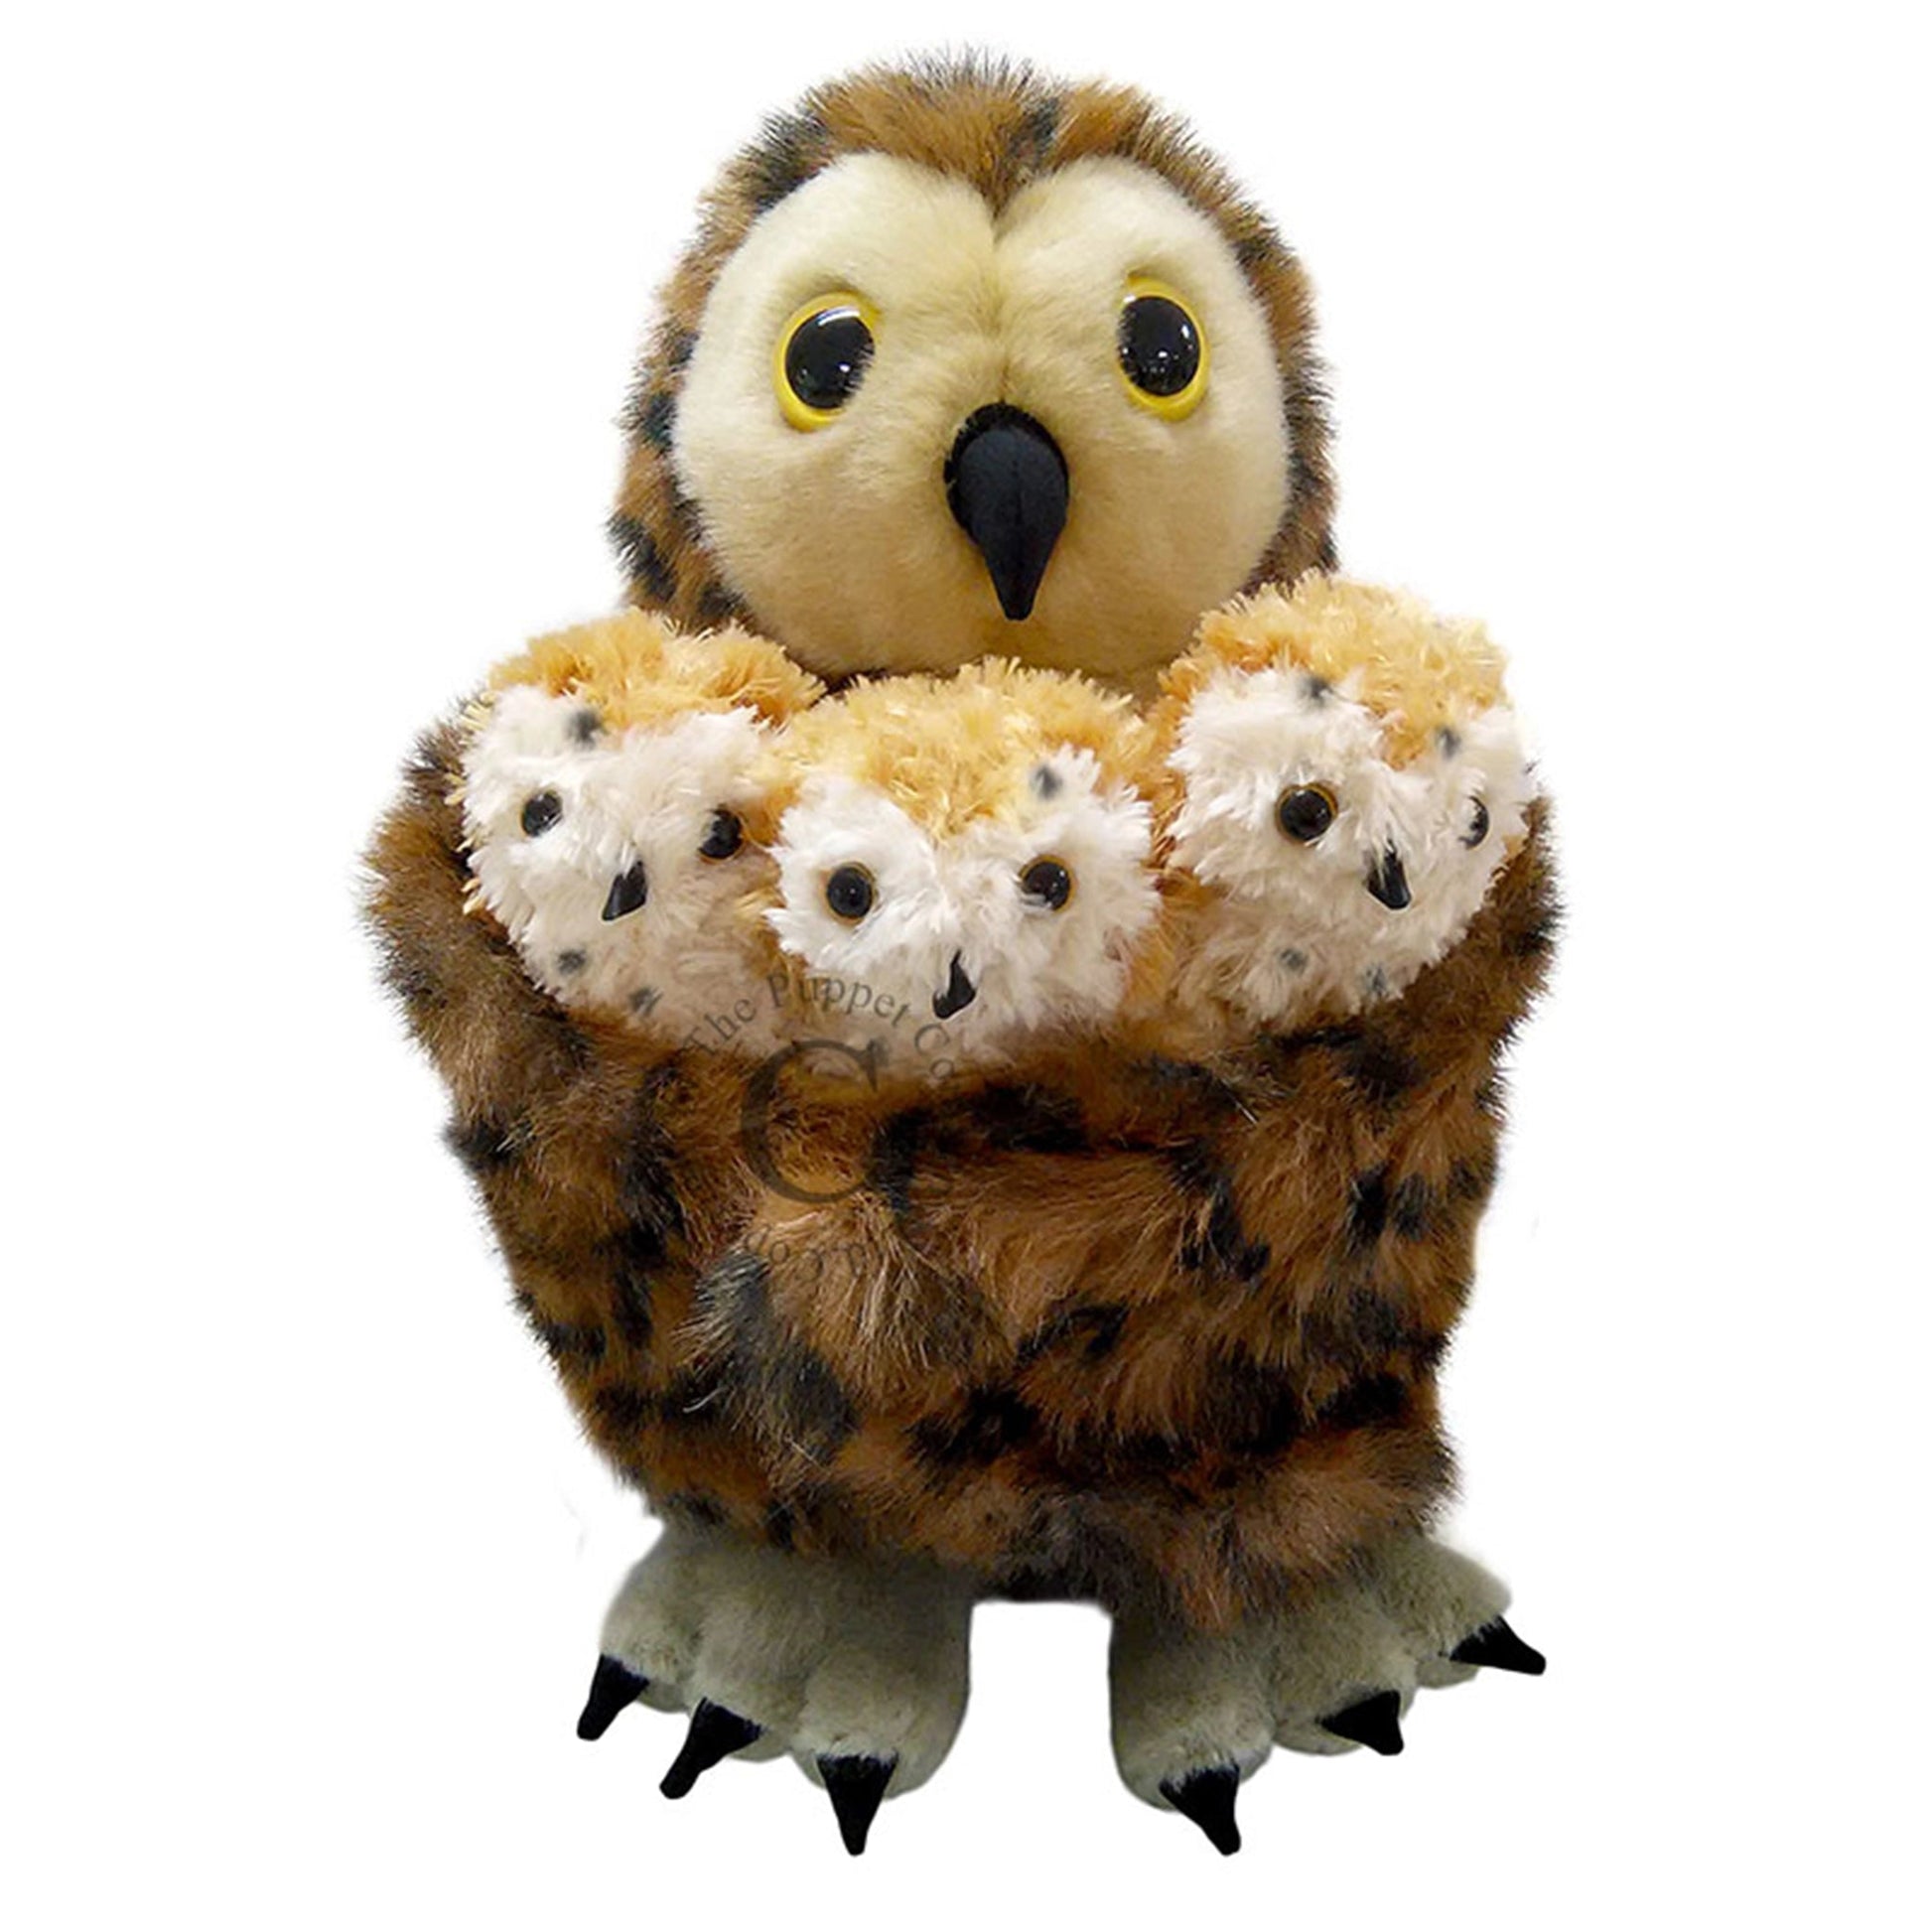 Hide-Away Puppets - Tawny Owl Family - The Puppet Company - The Forgotten Toy Shop